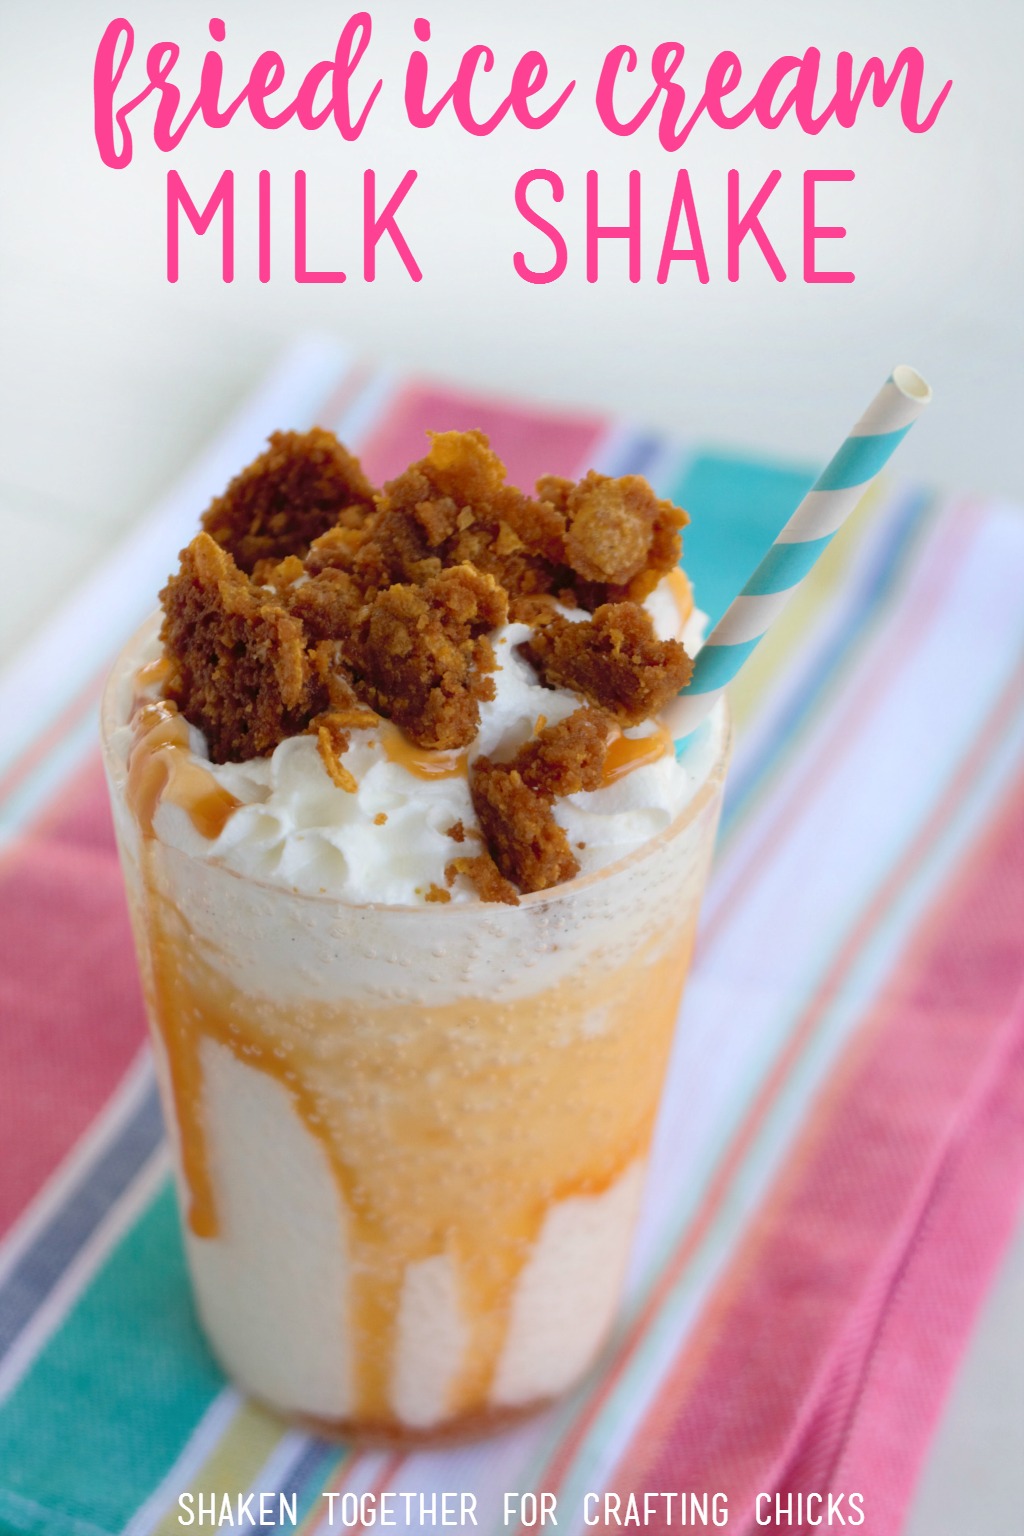 A Fried Ice Cream Milk Shake is the perfect drink for Cinco de Mayo! A creamy vanilla milk shake is topping with whipped cream, caramel and a crispy crunchy crumble topping!